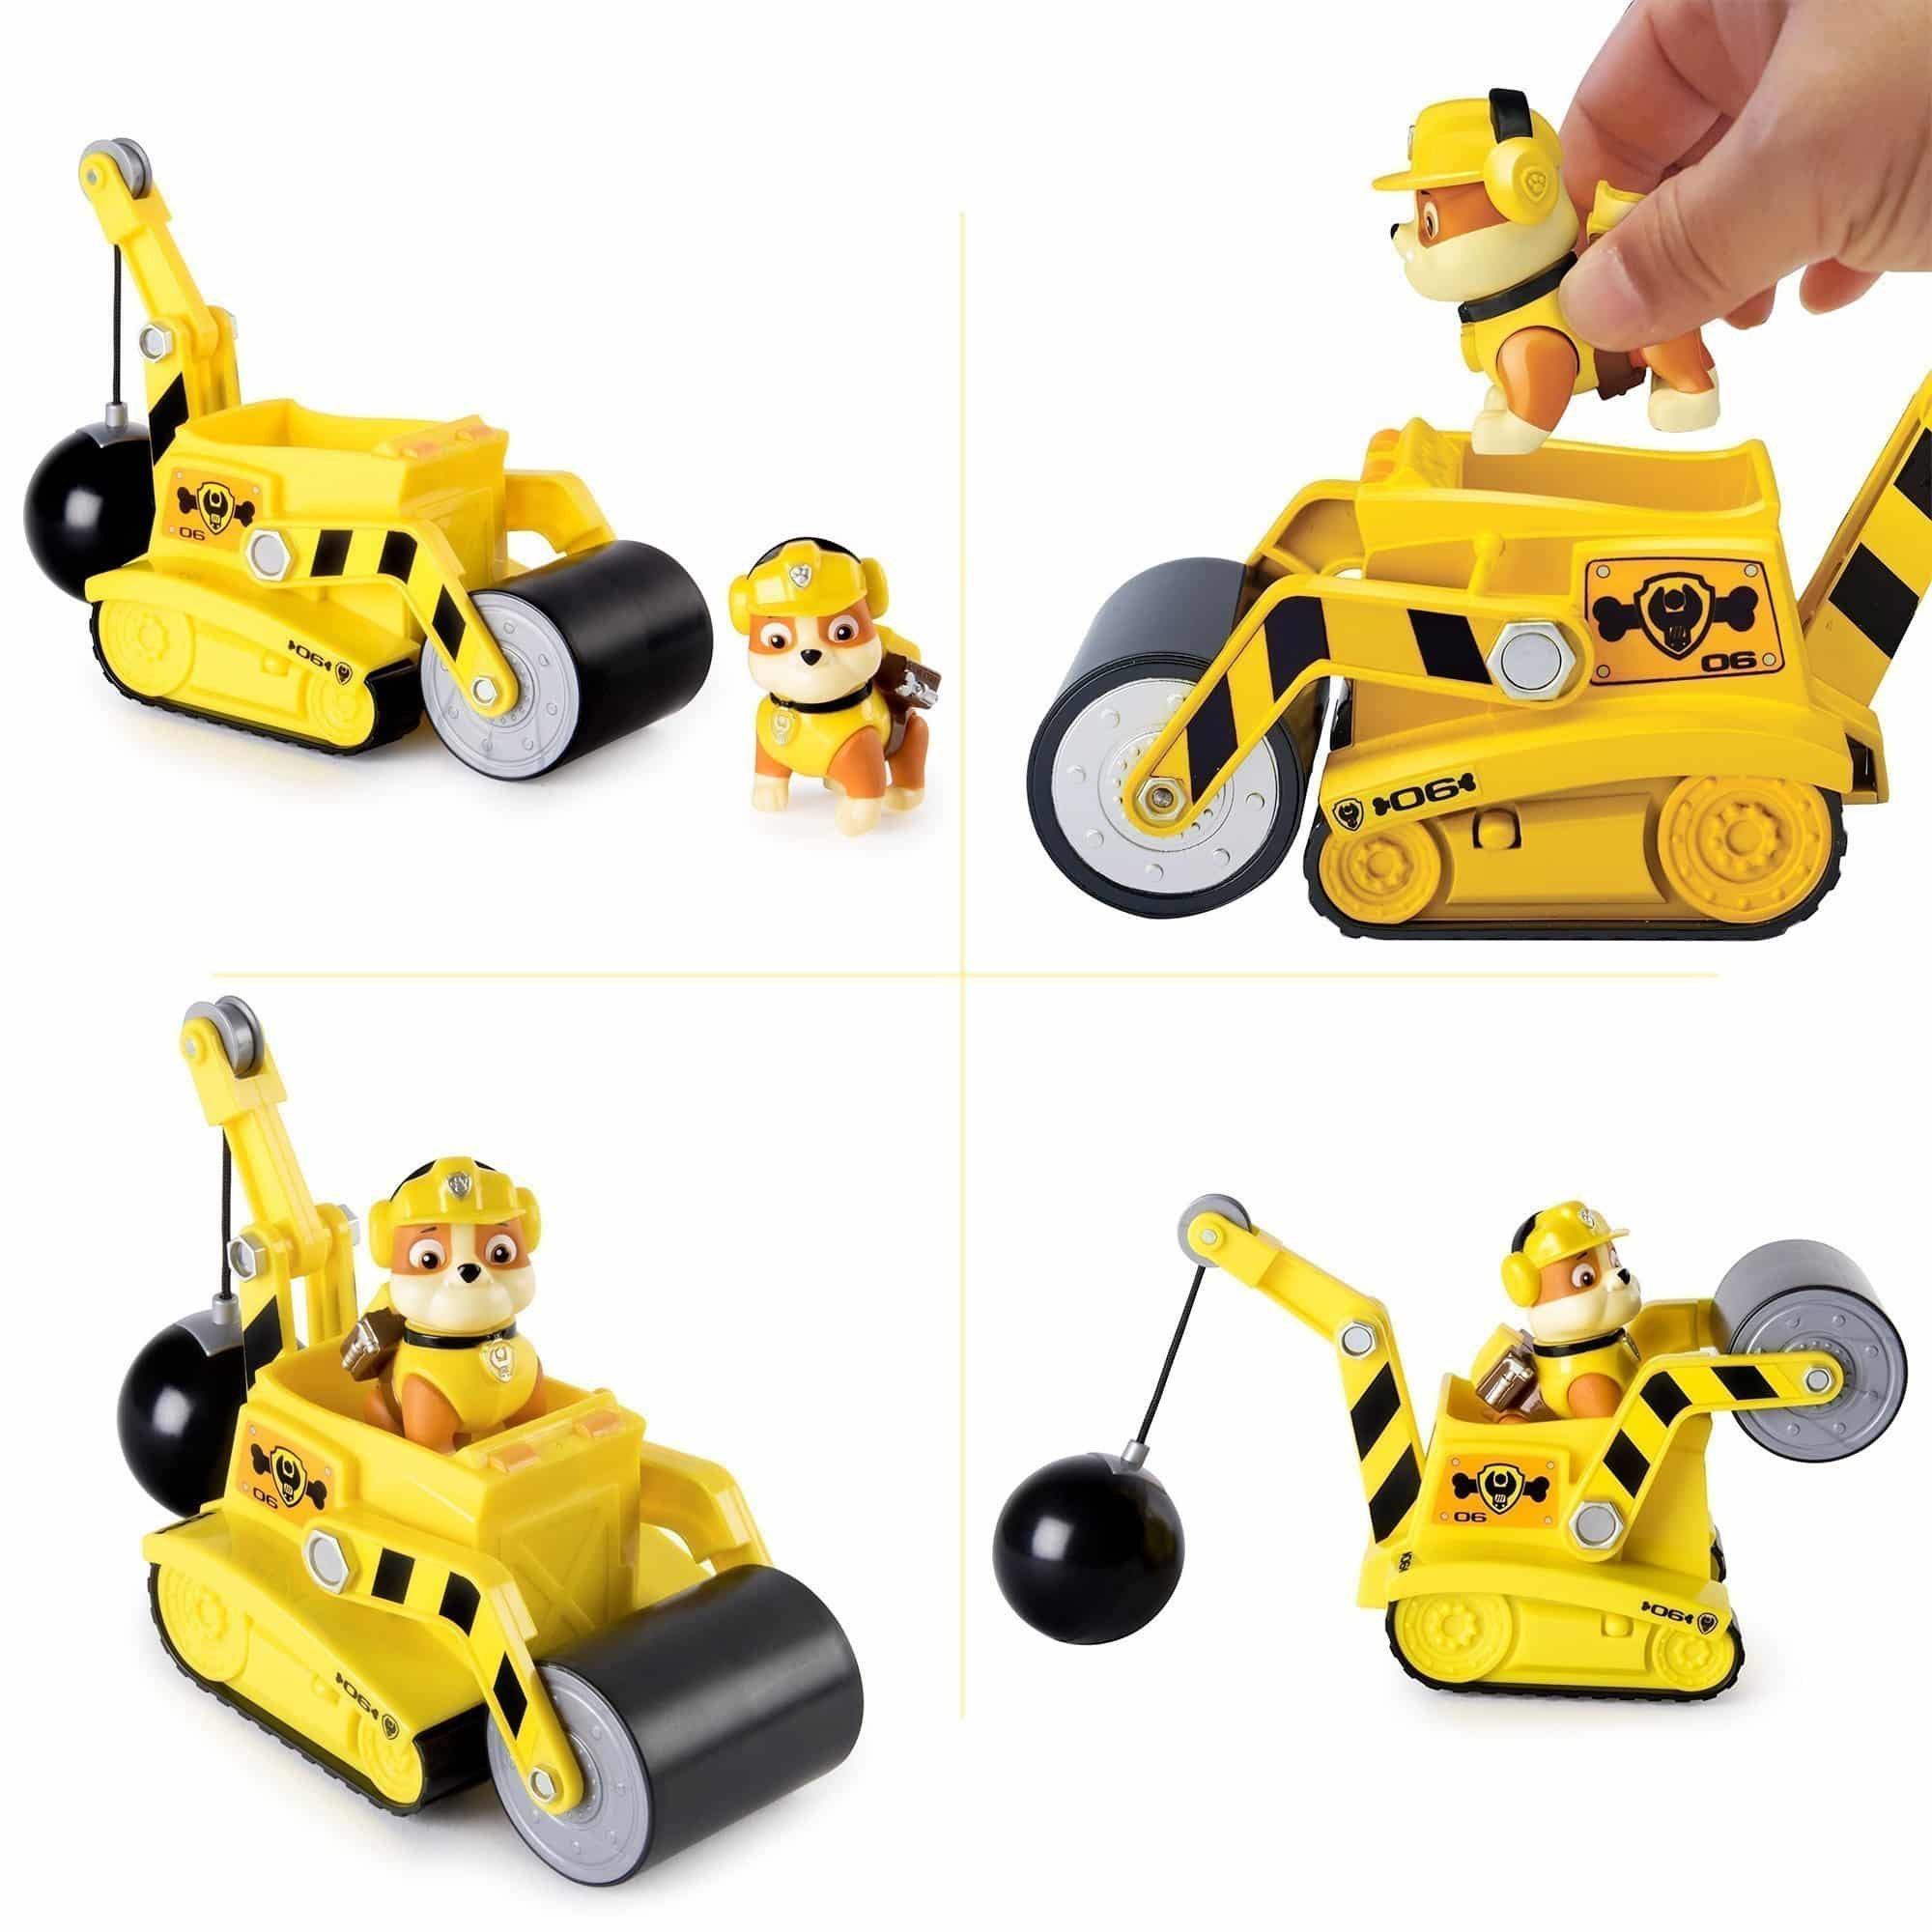 Nickelodeon - Paw Patrol - Rubble's Steam Roller